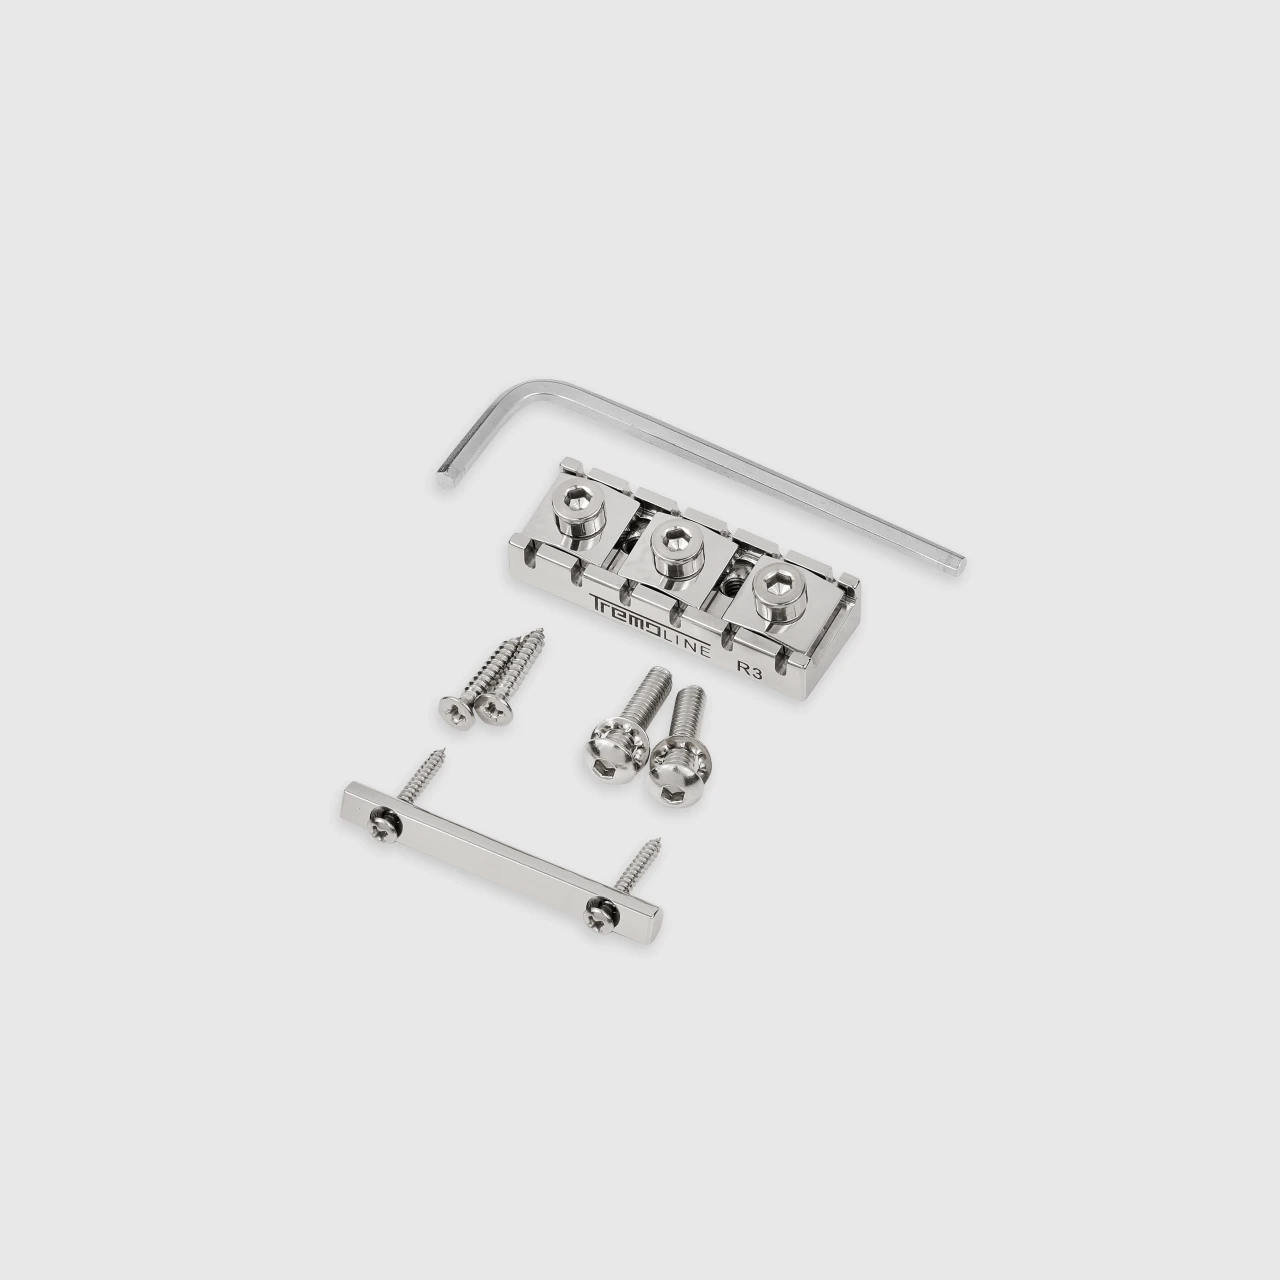 <img src=”Tremoline-Tremolo-system-flat-top-FT36T-R3-SP_6” width="1280" height="1280" alt=”locking nut set of the Tremoline FT36T tremolo from the rear side” />